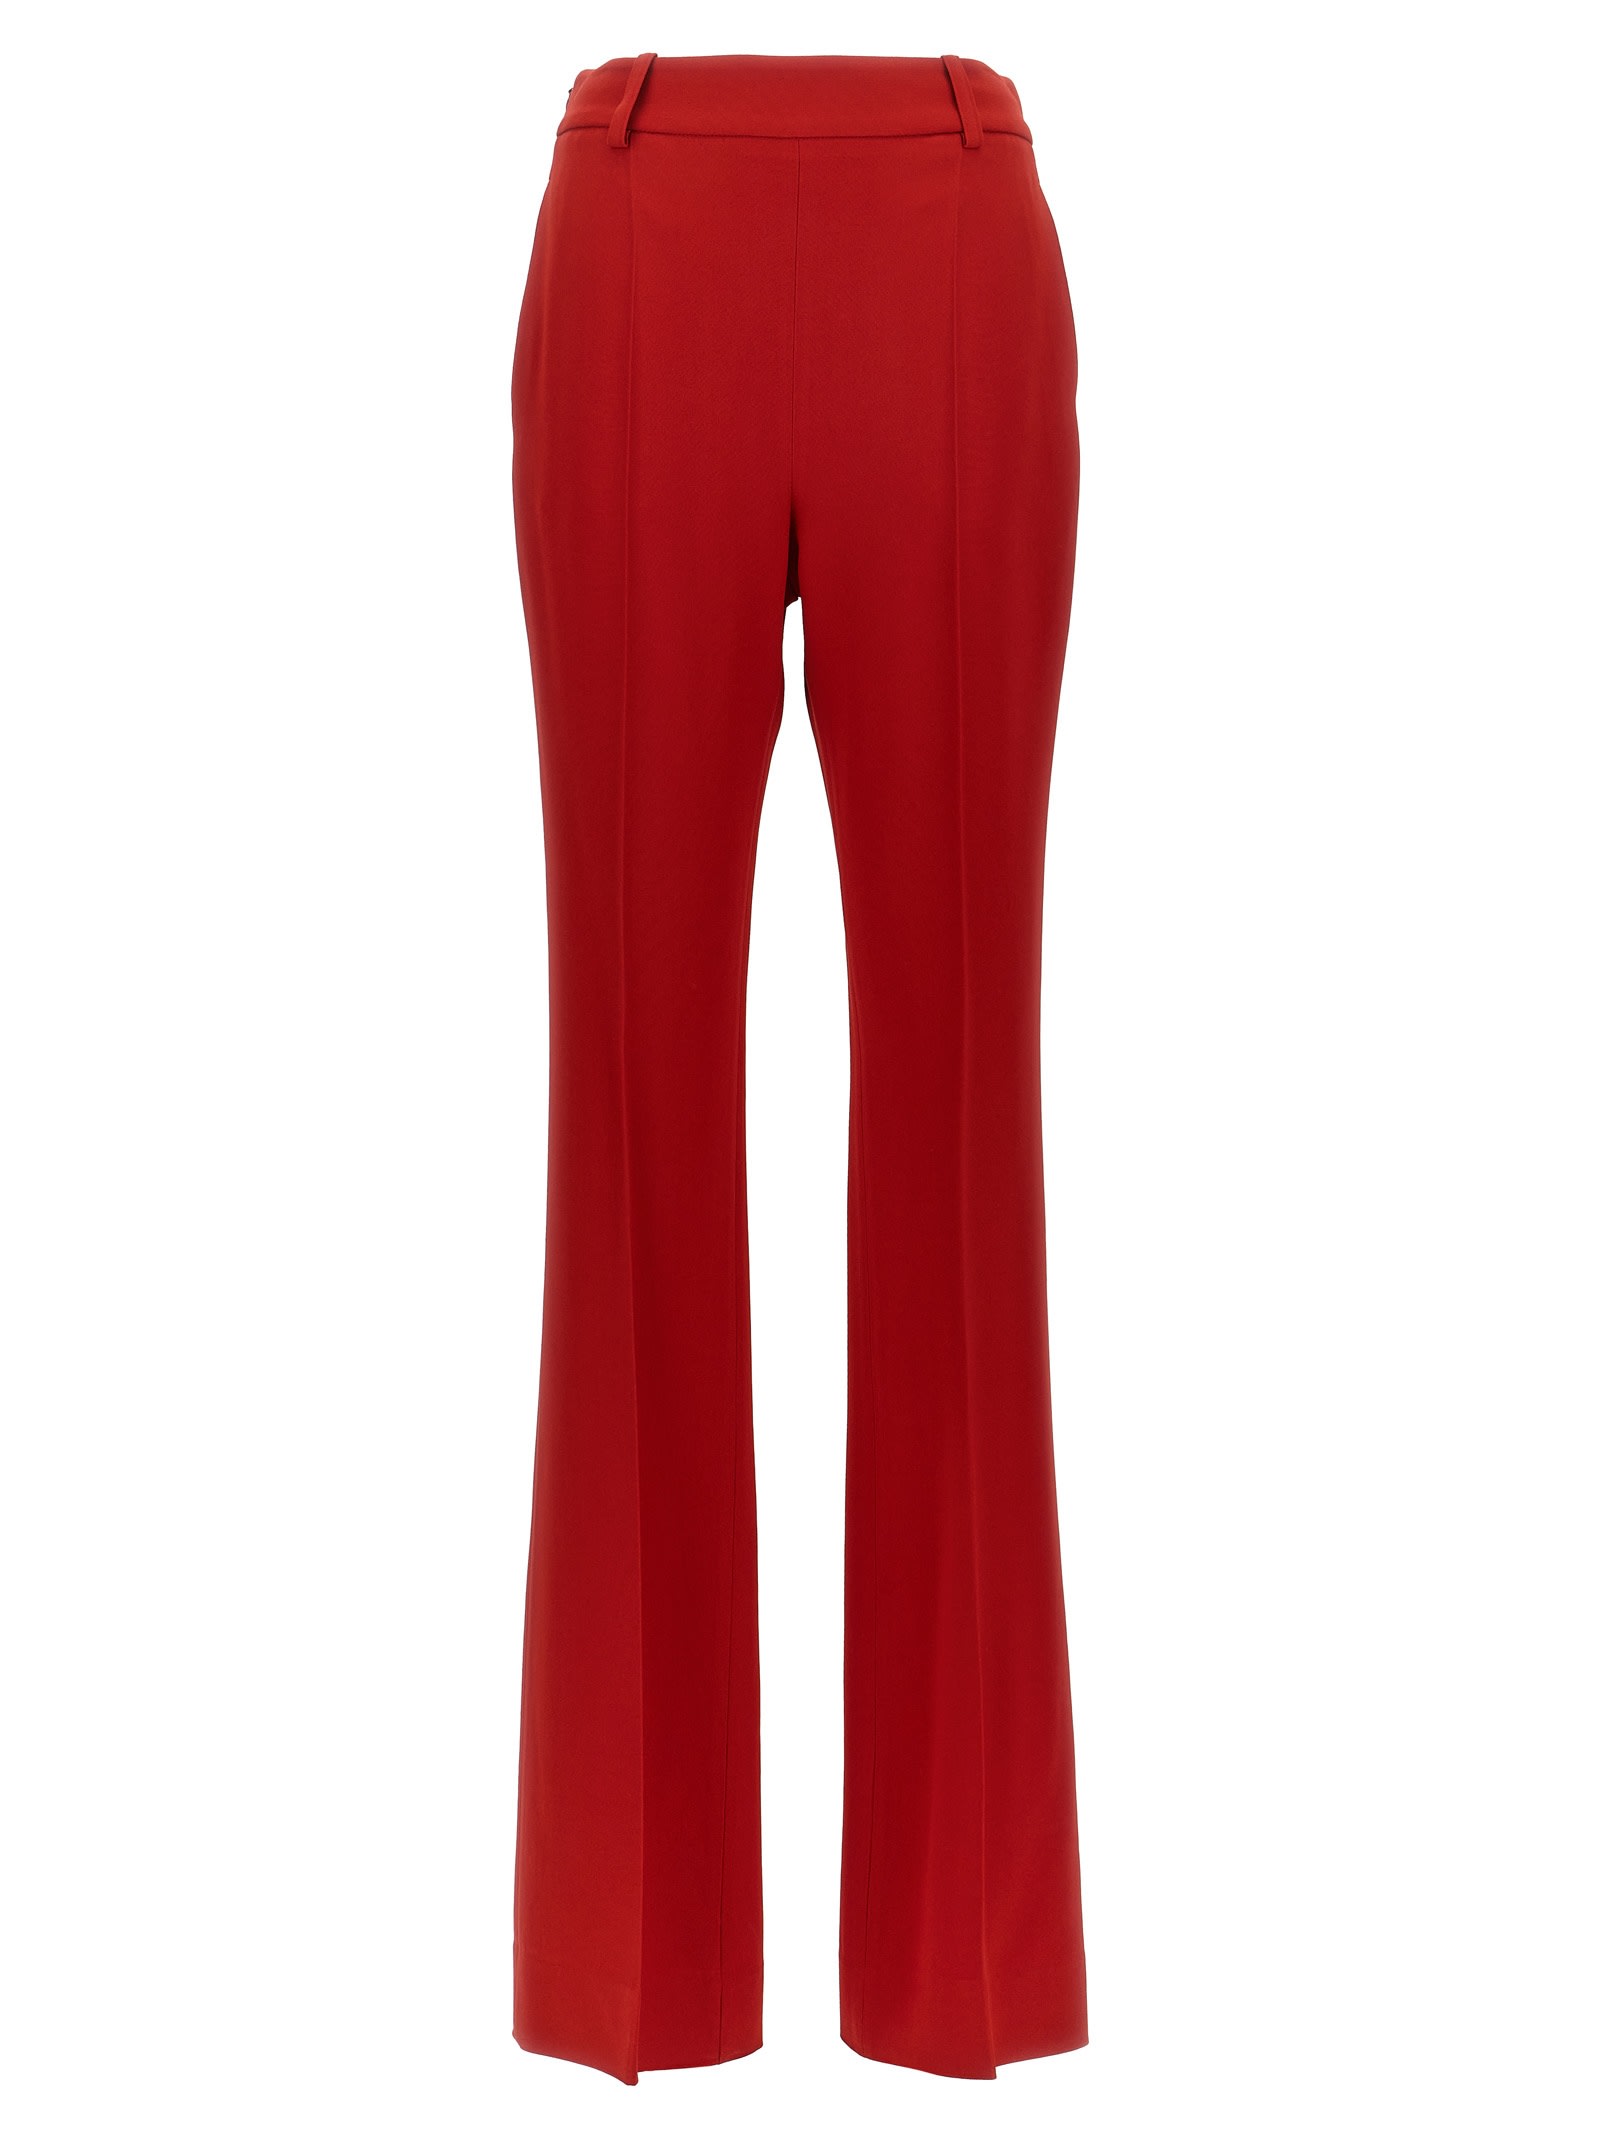 Ermanno Scervino Cady Bootcut Trousers